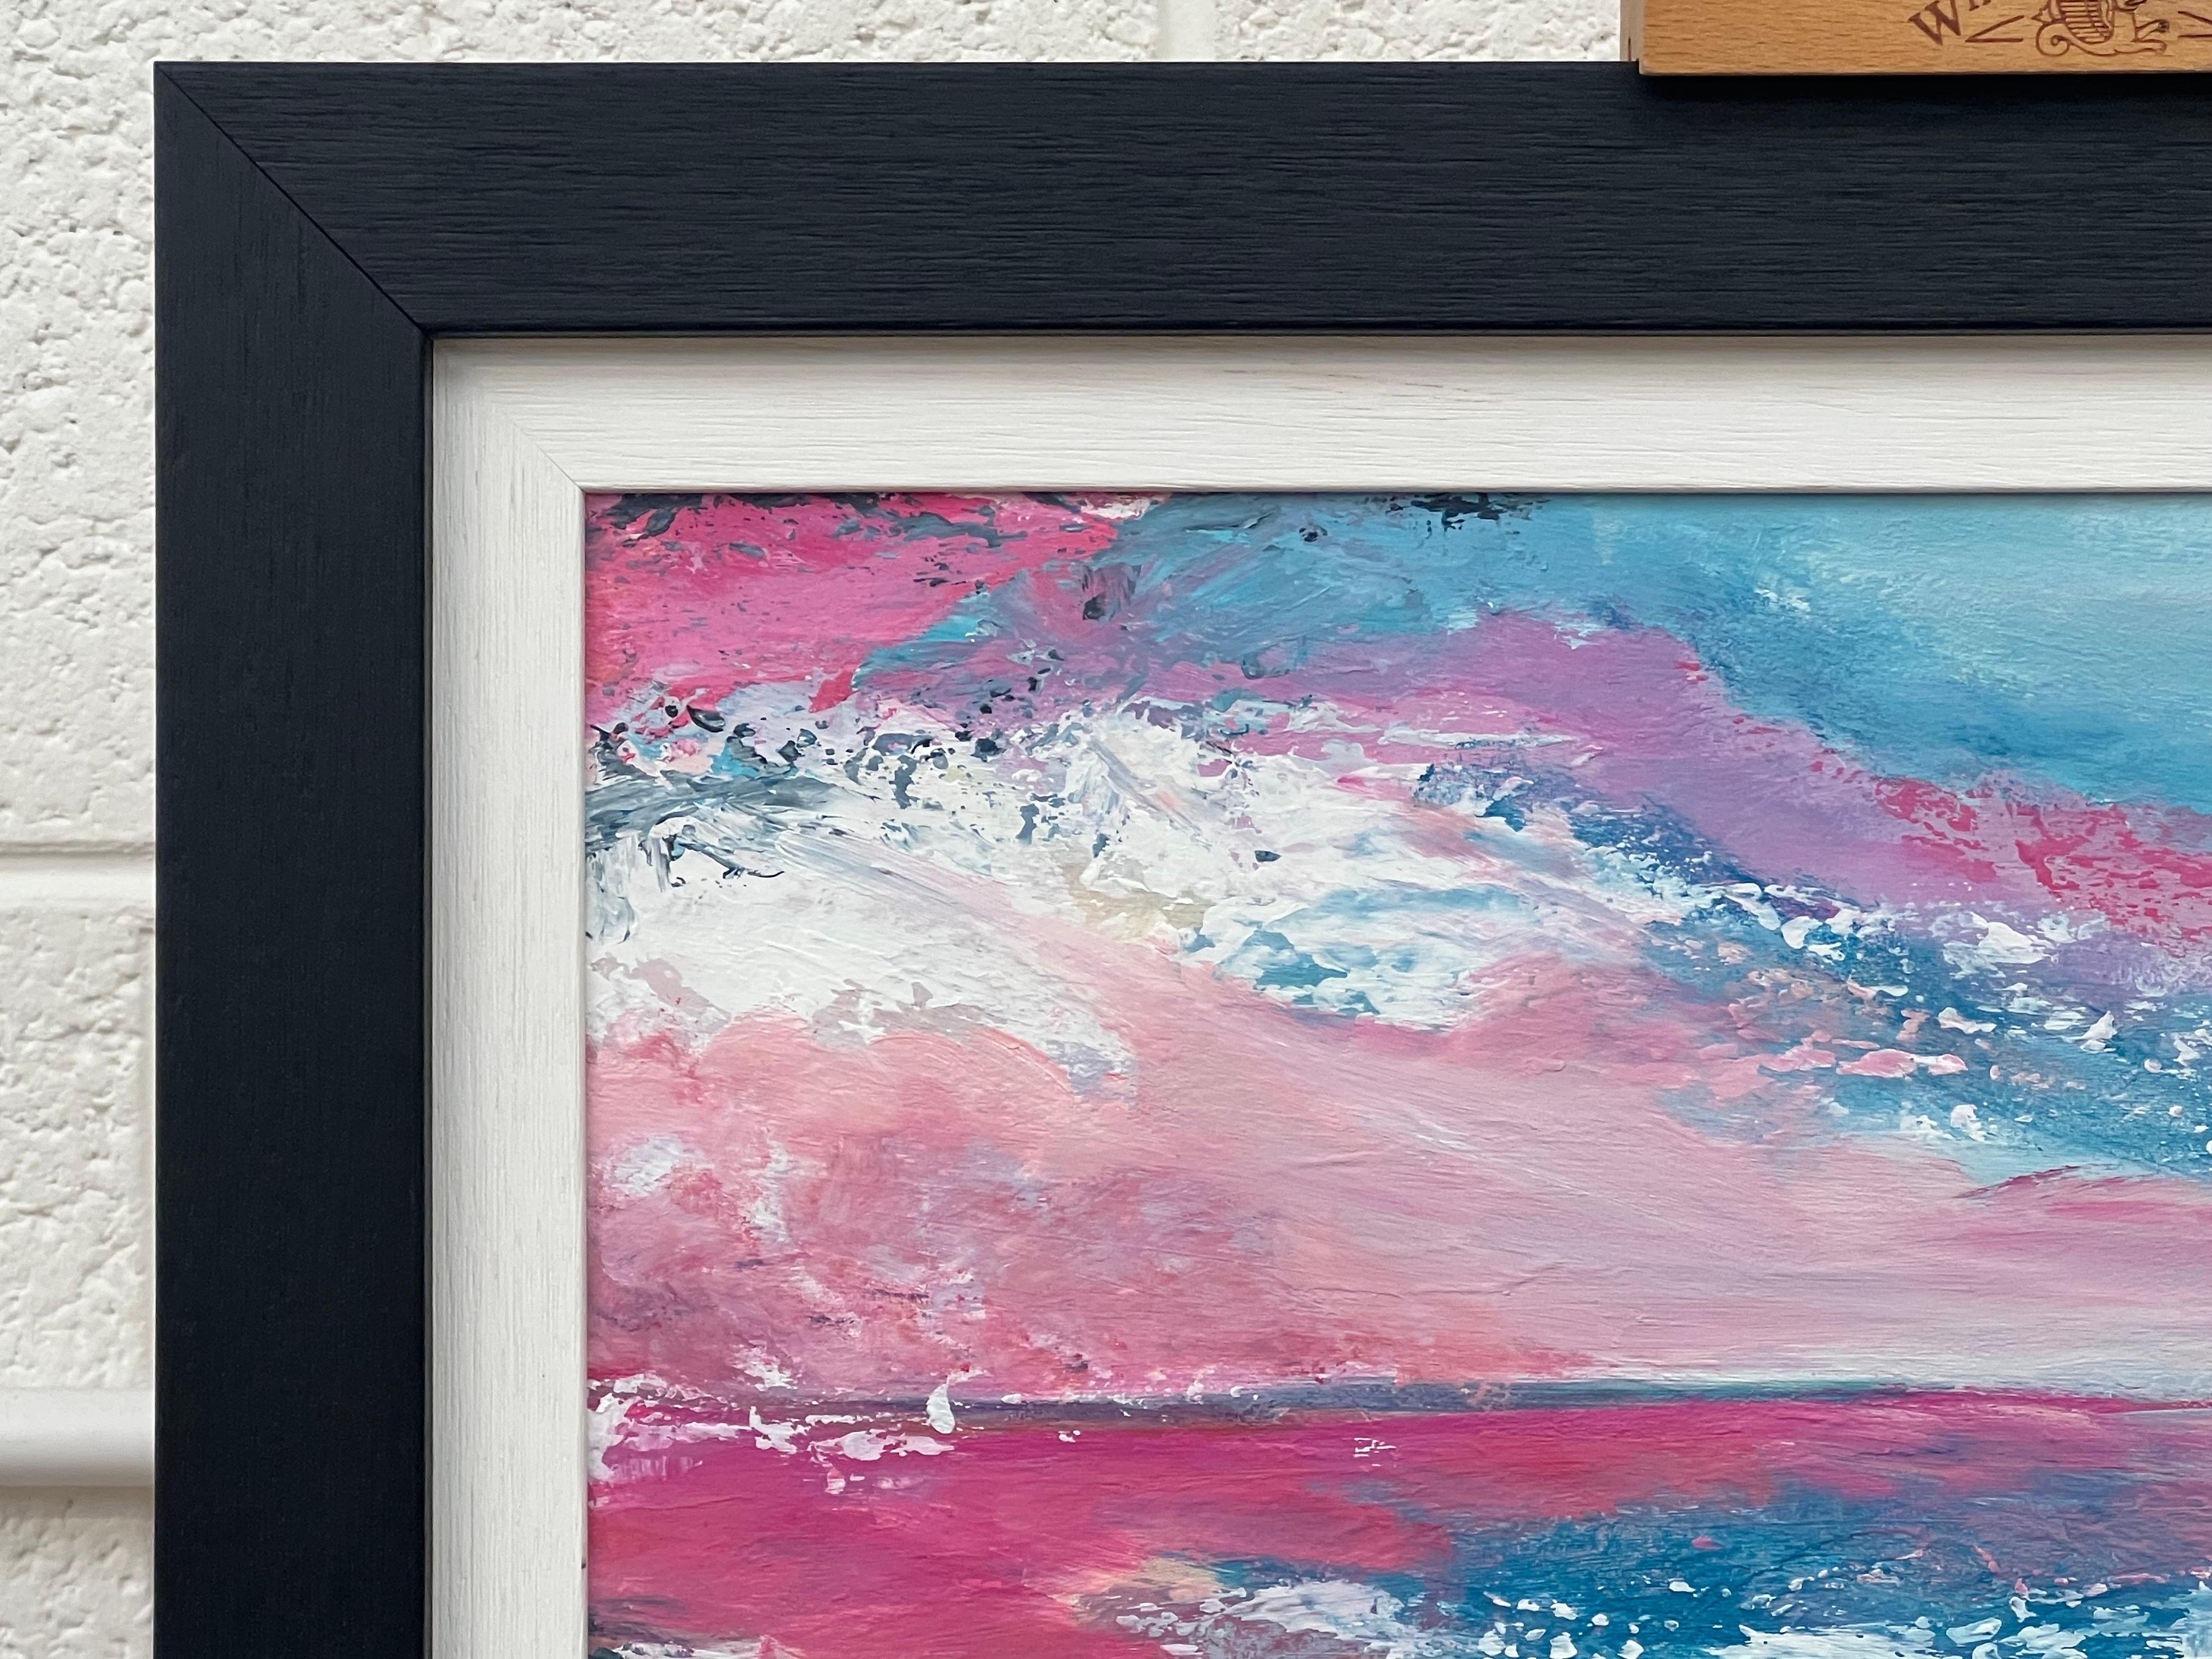 Abstract Landscape Seascape Painting with Pink & Blue Sky by British Artist For Sale 6